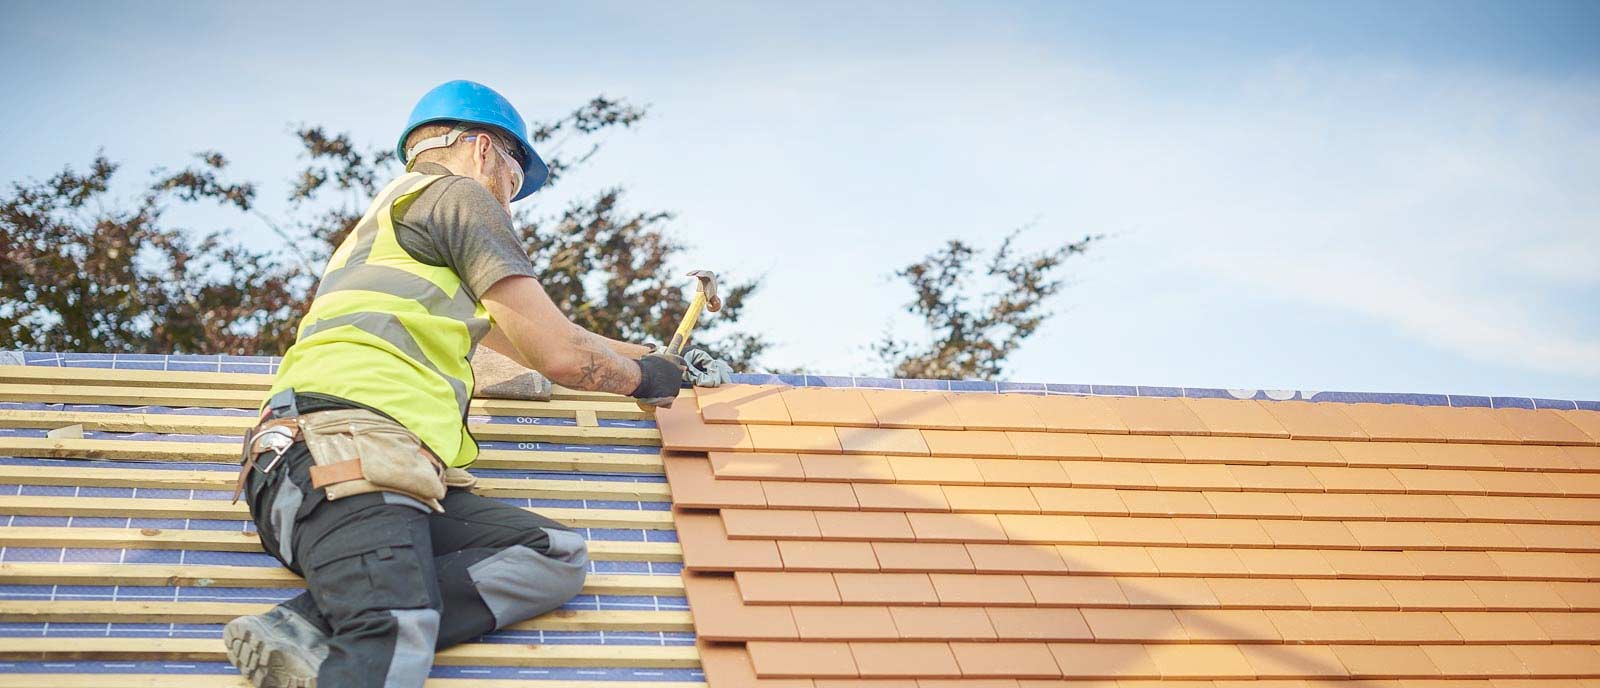 How can regular maintenance prevent the need for emergency roof repairs?